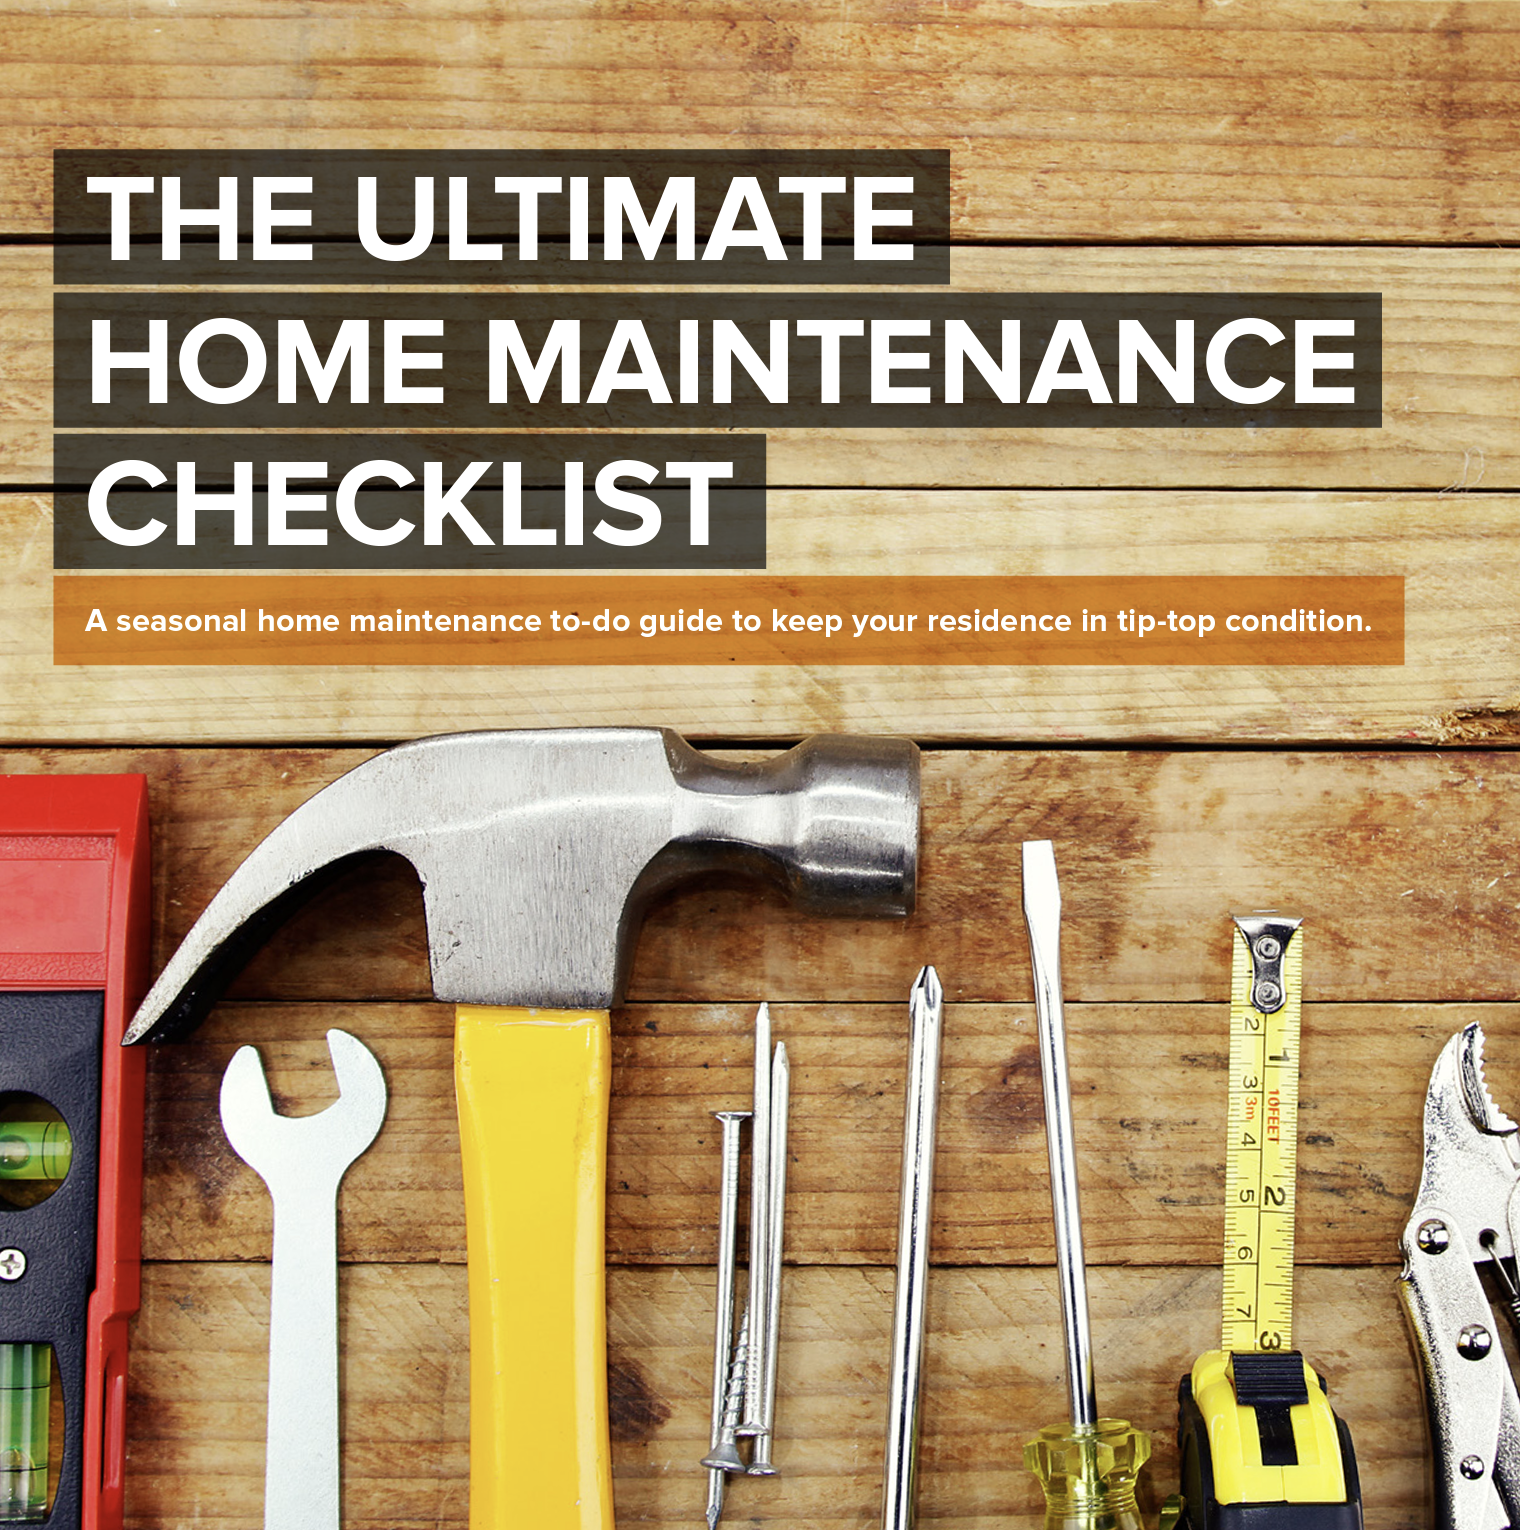 The ultimate home maintenance checklist